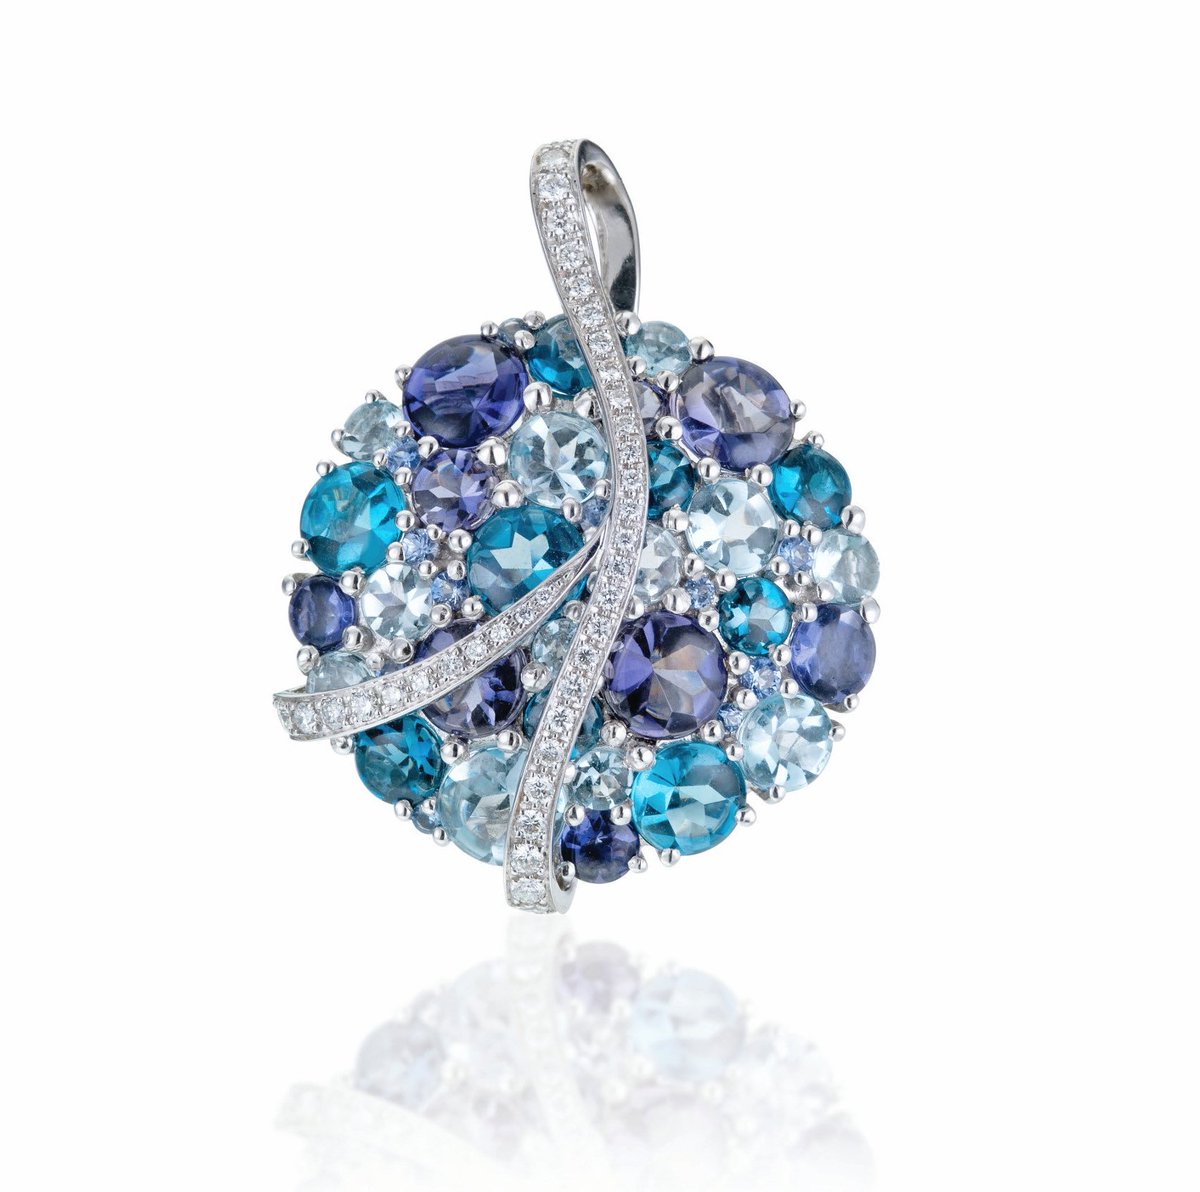 January blues? Yes please!

Pendant featuring sapphires, blue topaz and iolites, wrapped in a diamond ribbon.

Guaranteed to lift your spirits.

#finejewellery #finejewelry #highjewellery #sapphirependant #pendant #contemporaryjewellery #contemporaryjewelry